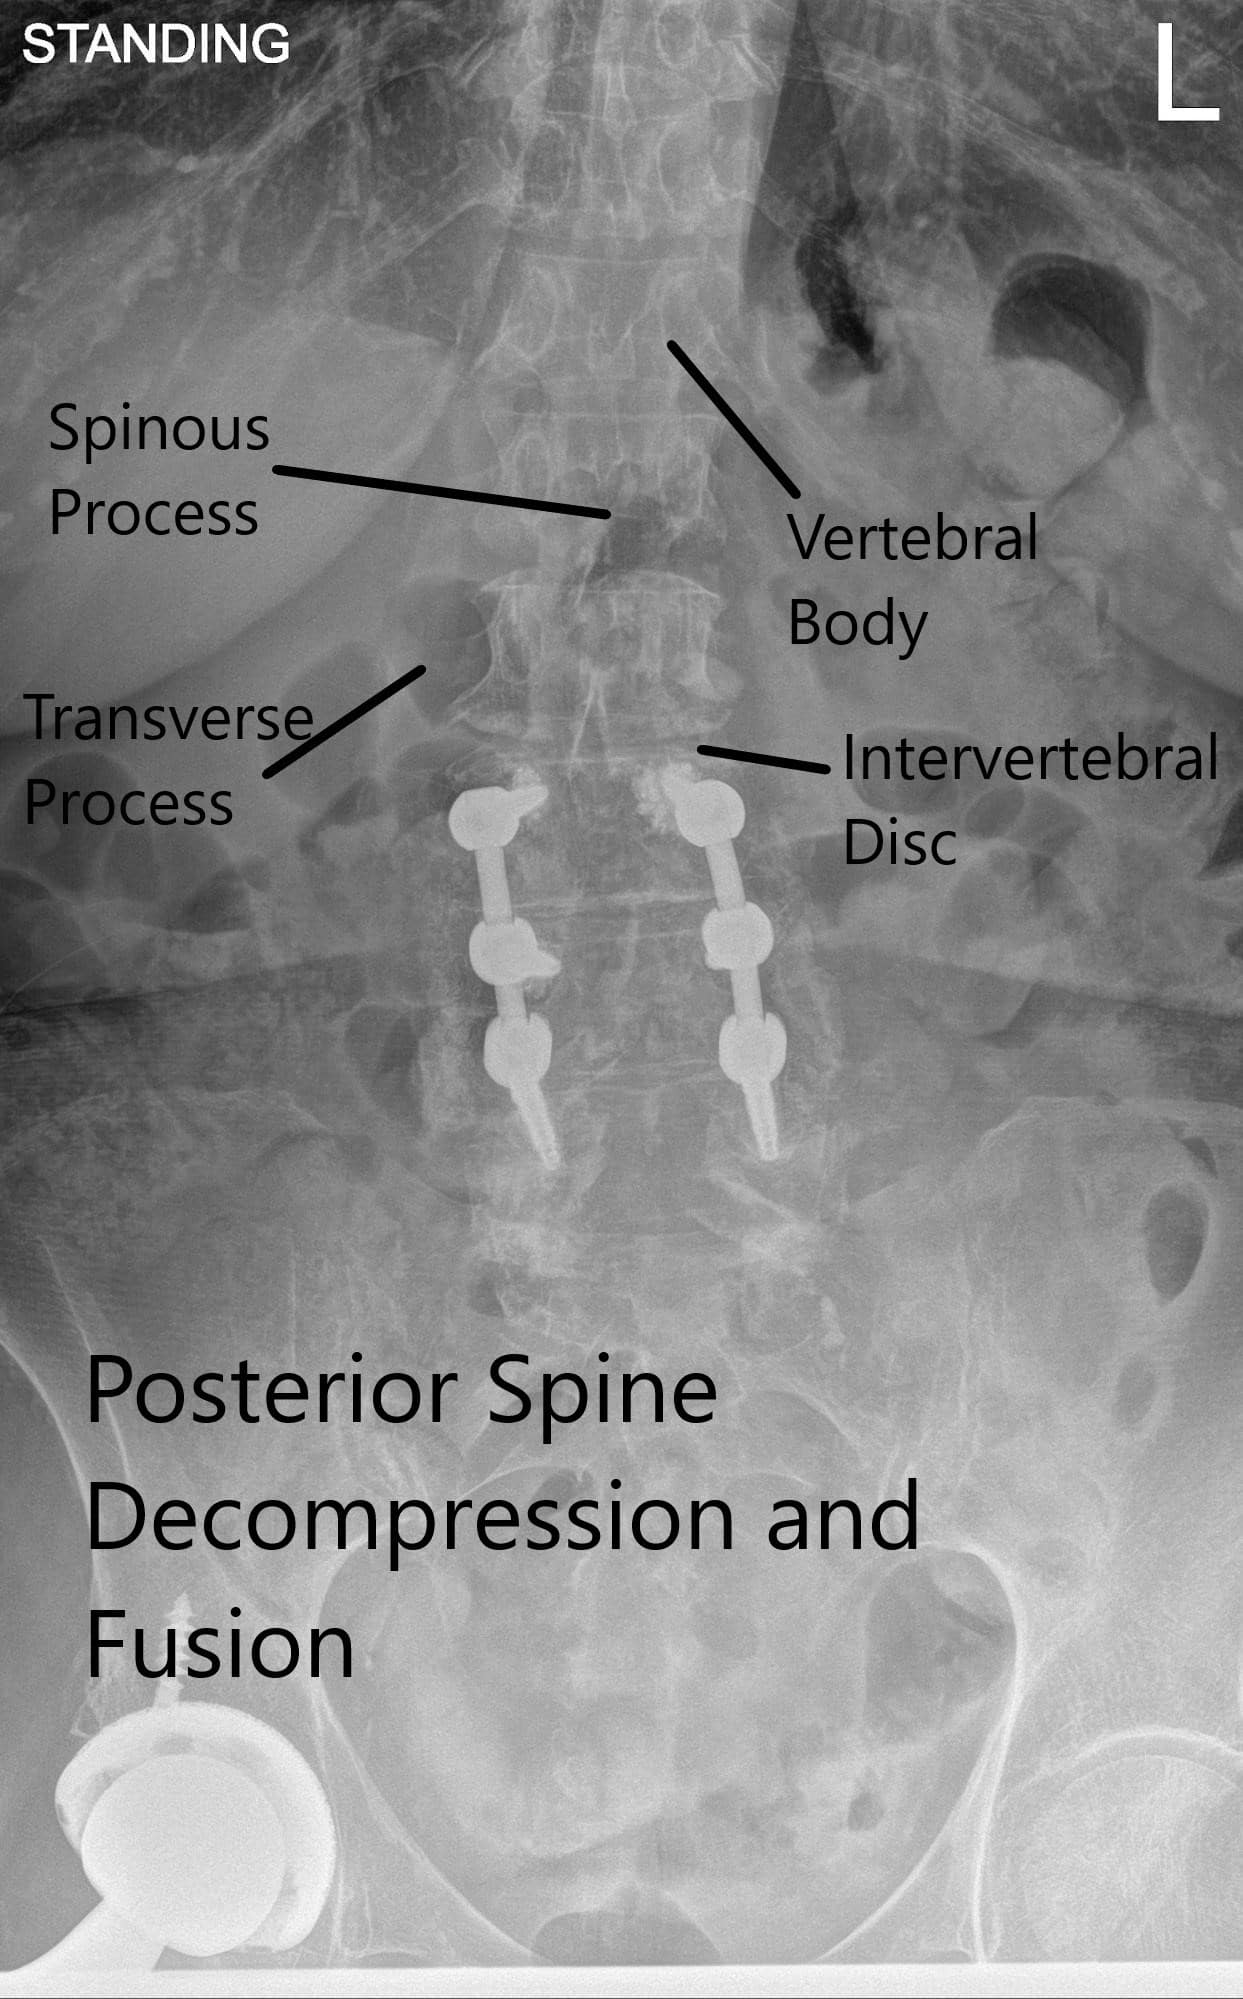 X-ray of the LS spine in AP and Lateral views